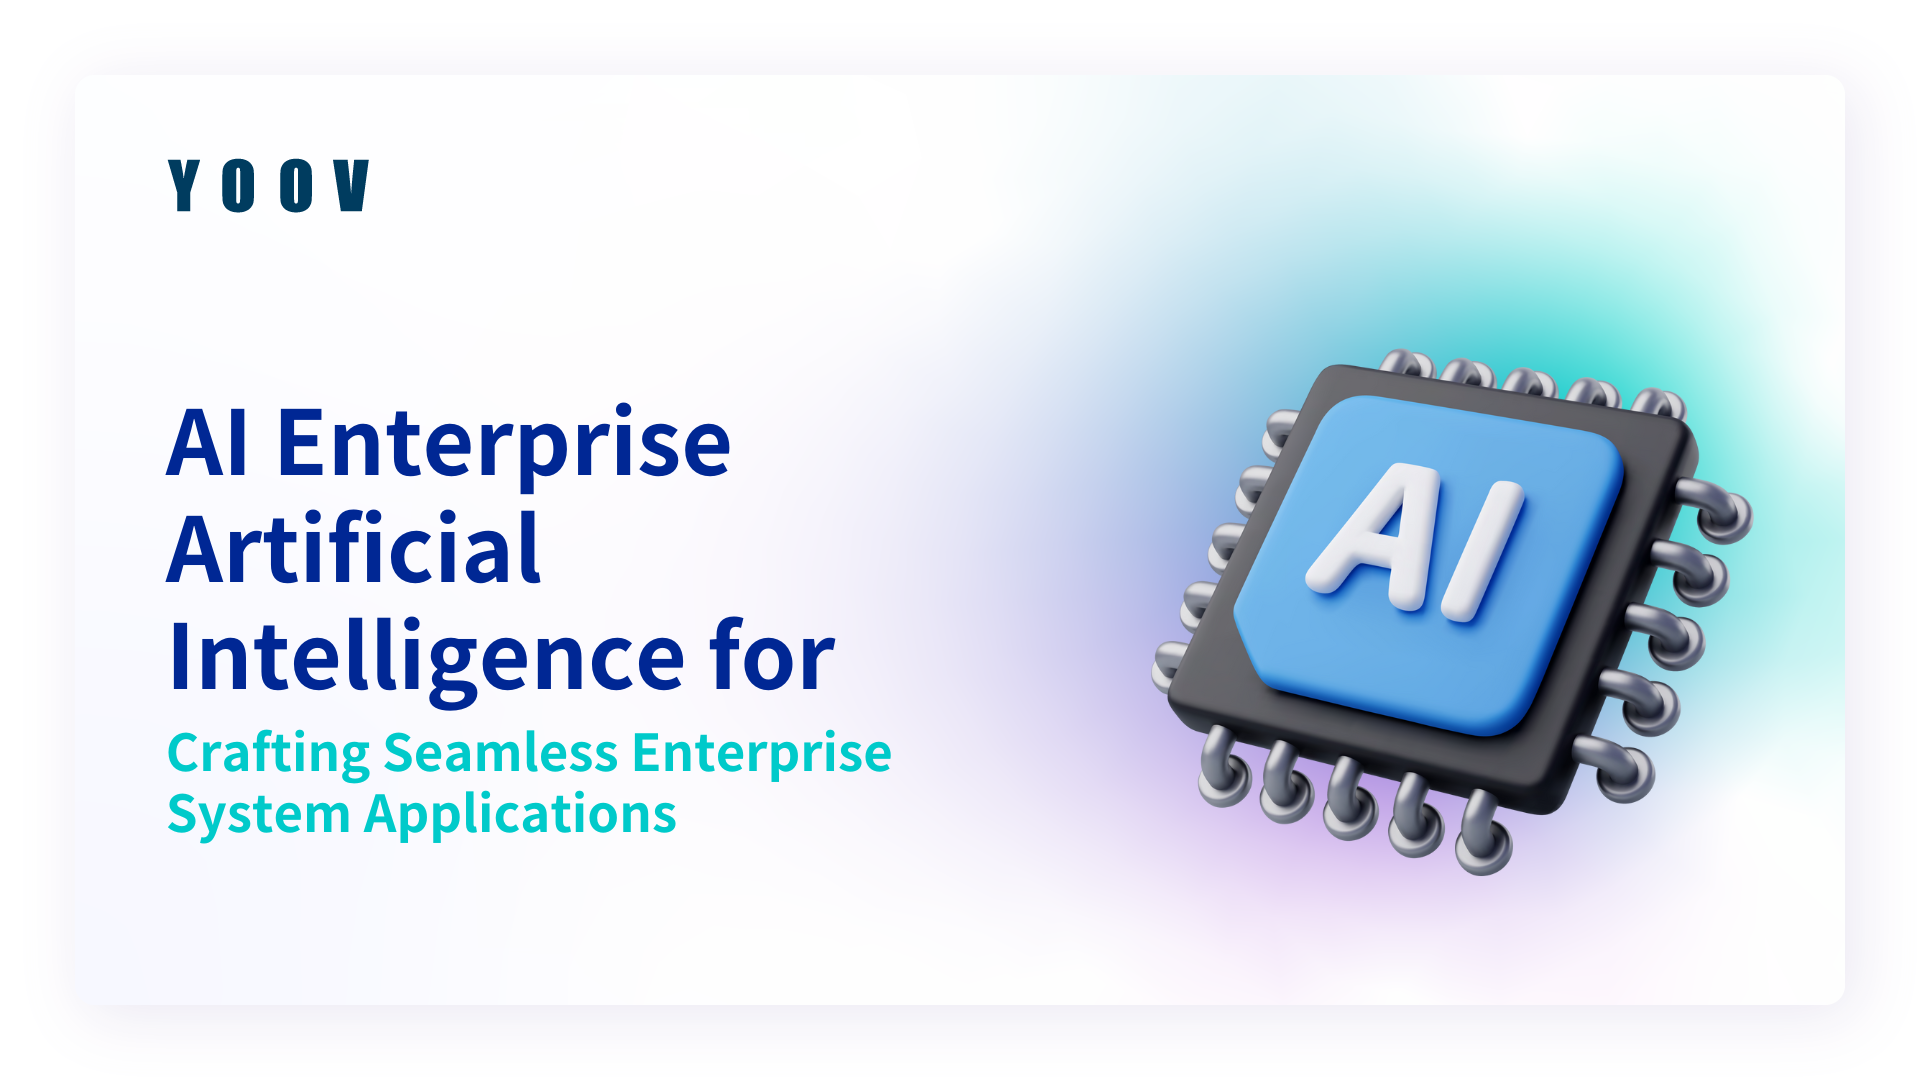 AI Enterprise Artificial Intelligence for Crafting Seamless Enterprise System Applications